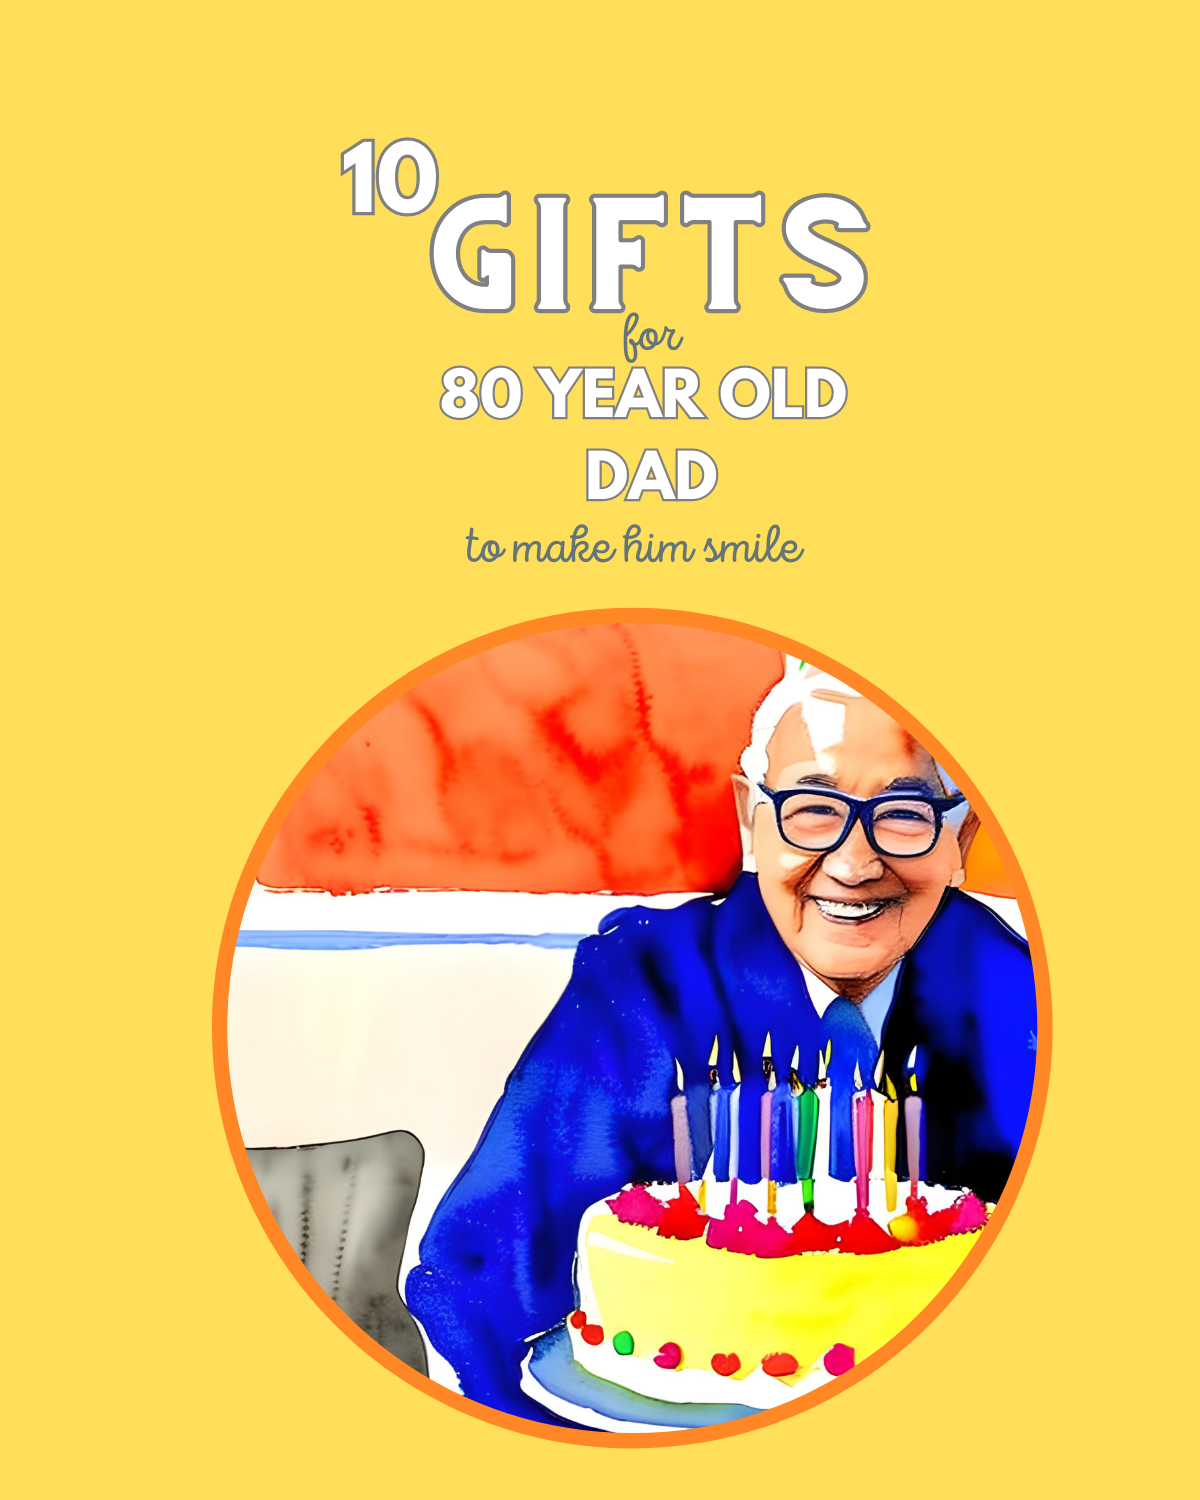 Gift Ideas That Will Make Your 80-Year-Old Dad Smile